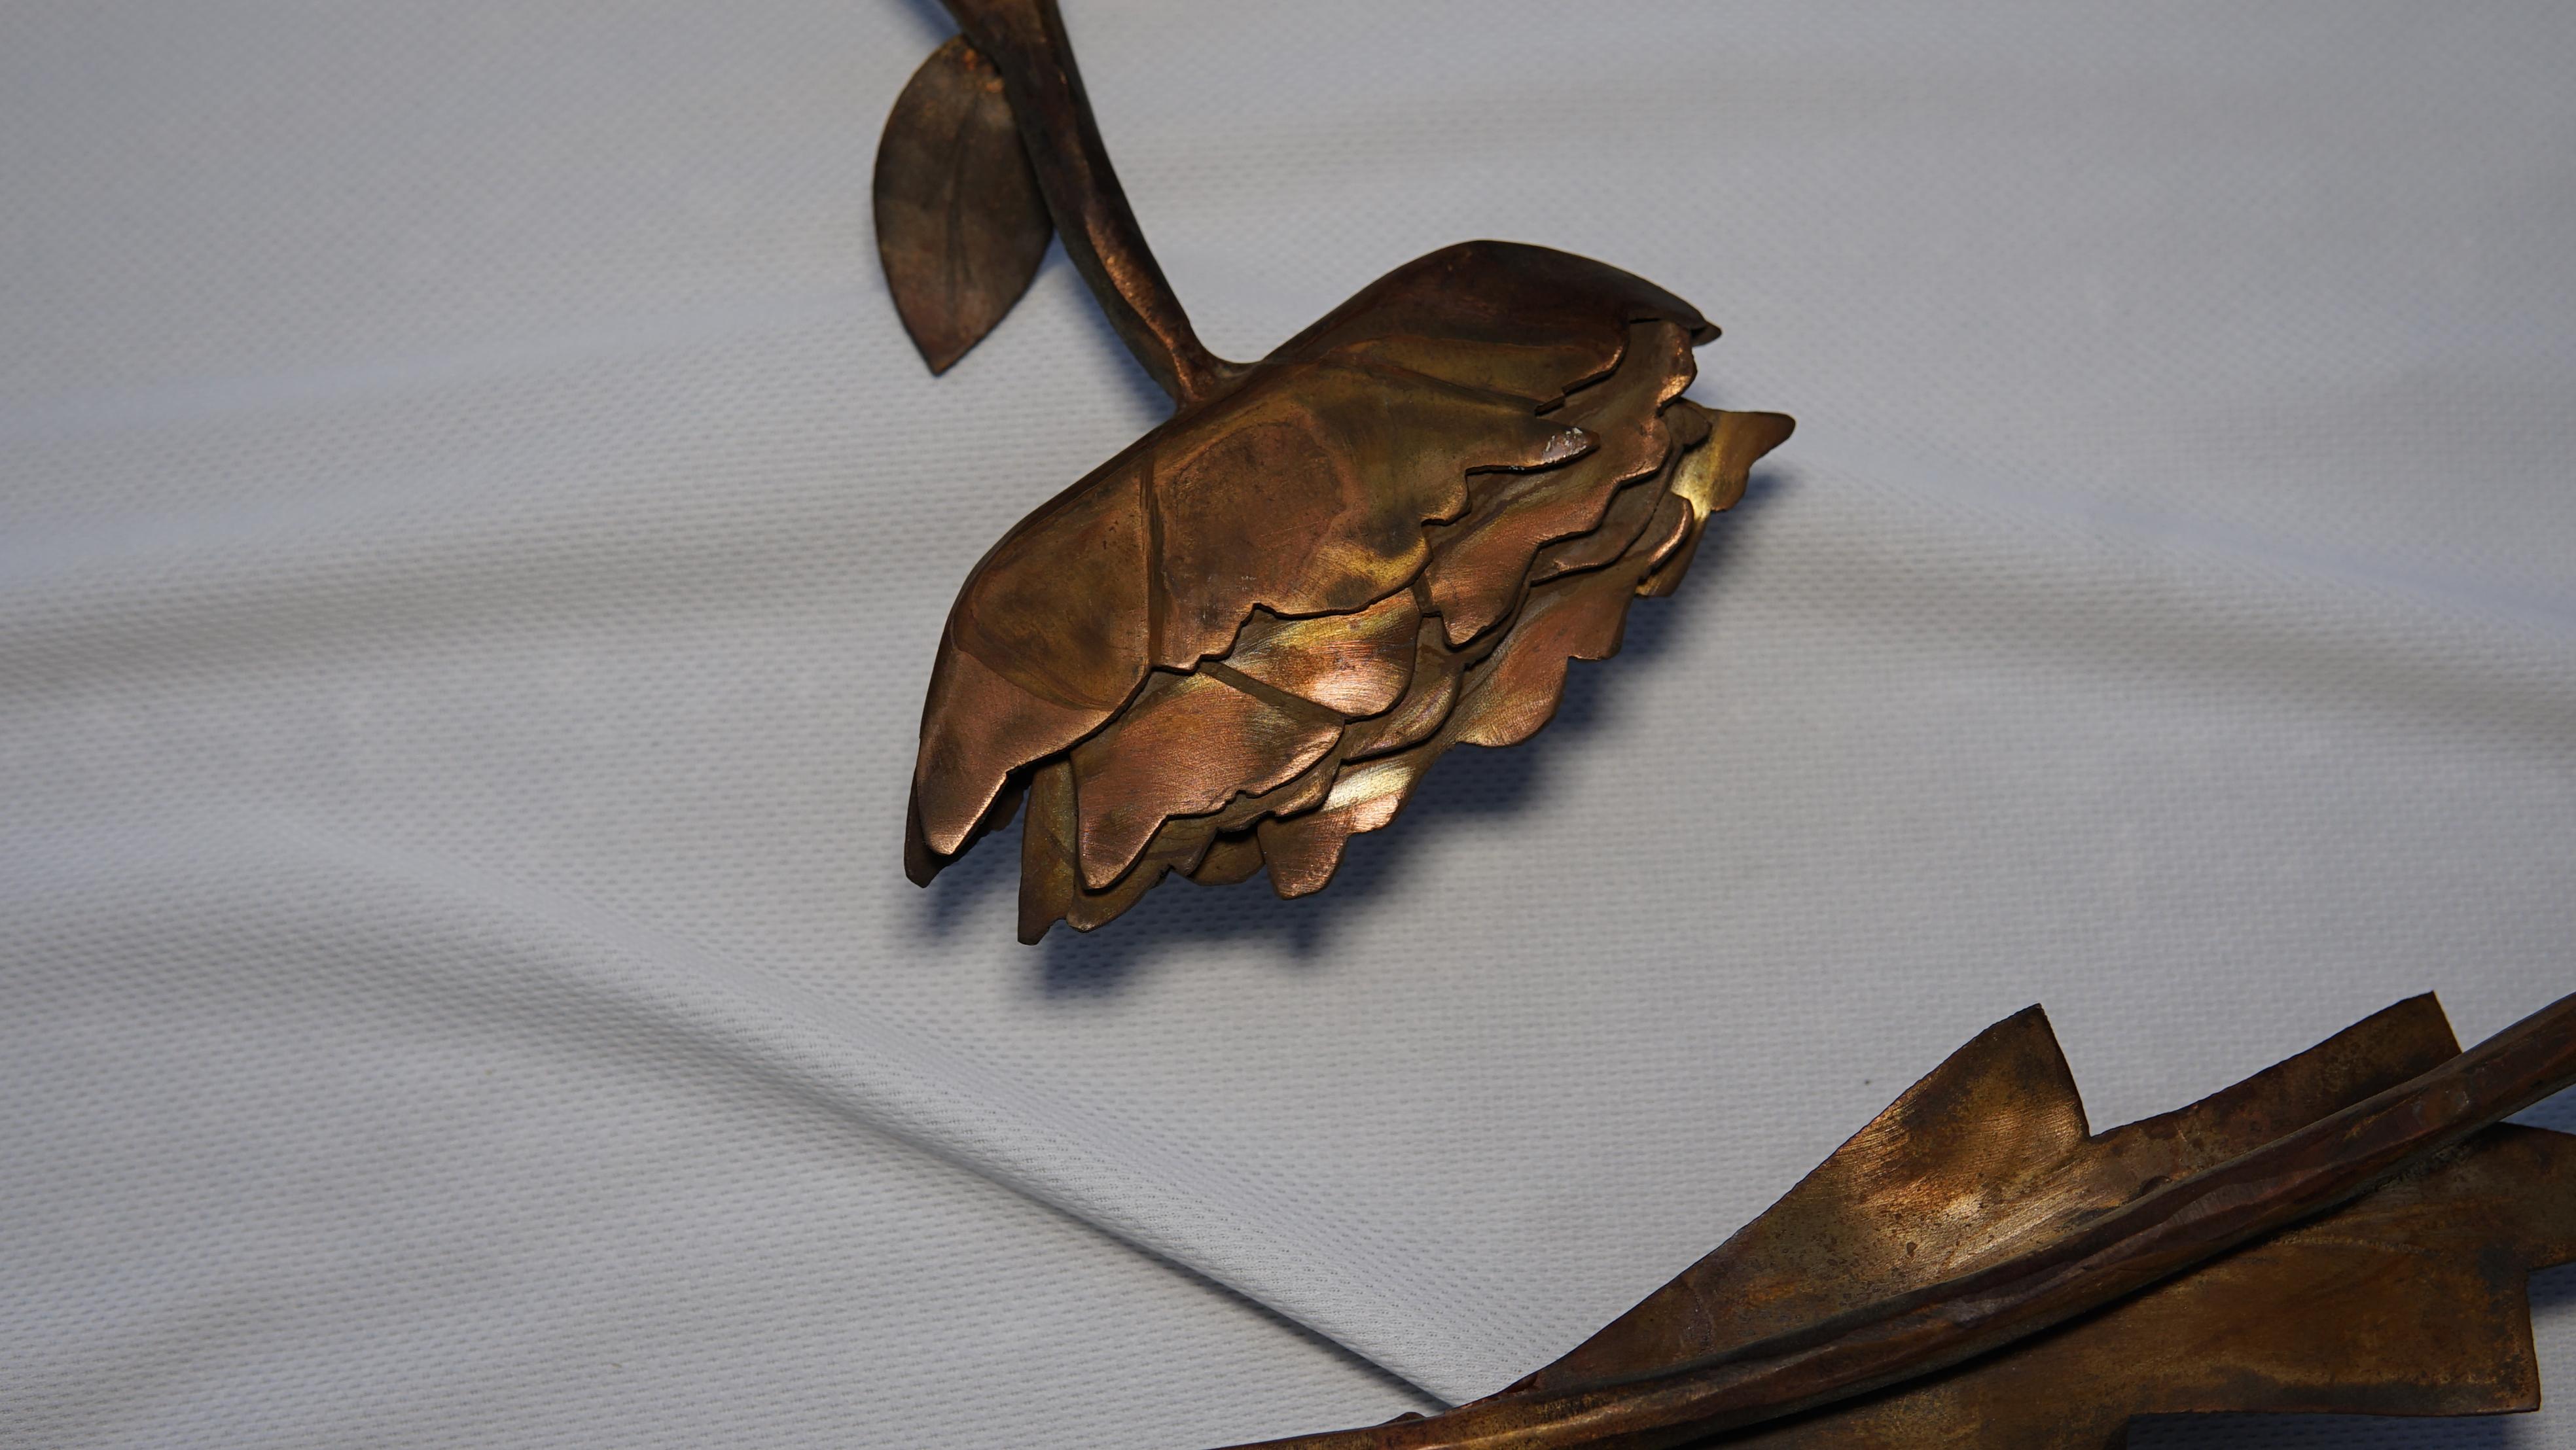 American Craftsman Copper Monumental Collectible Hand-Forged Signed Leaf and Floral Sculpture 